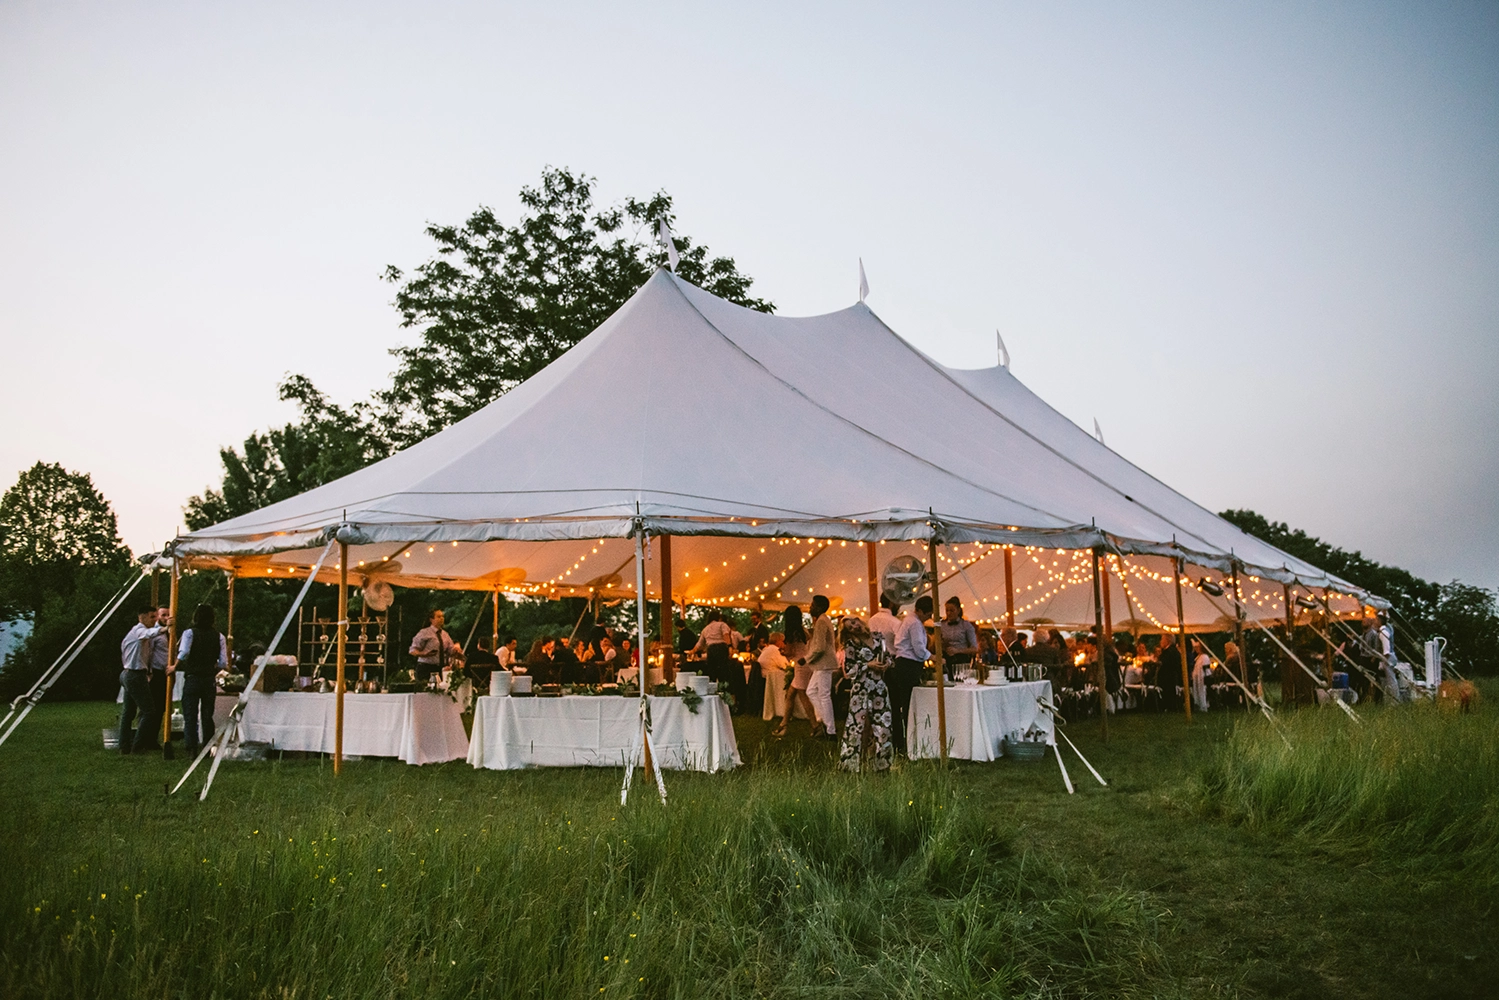 Sail cloth tents for outdoor wedding at private property in western massachusetts